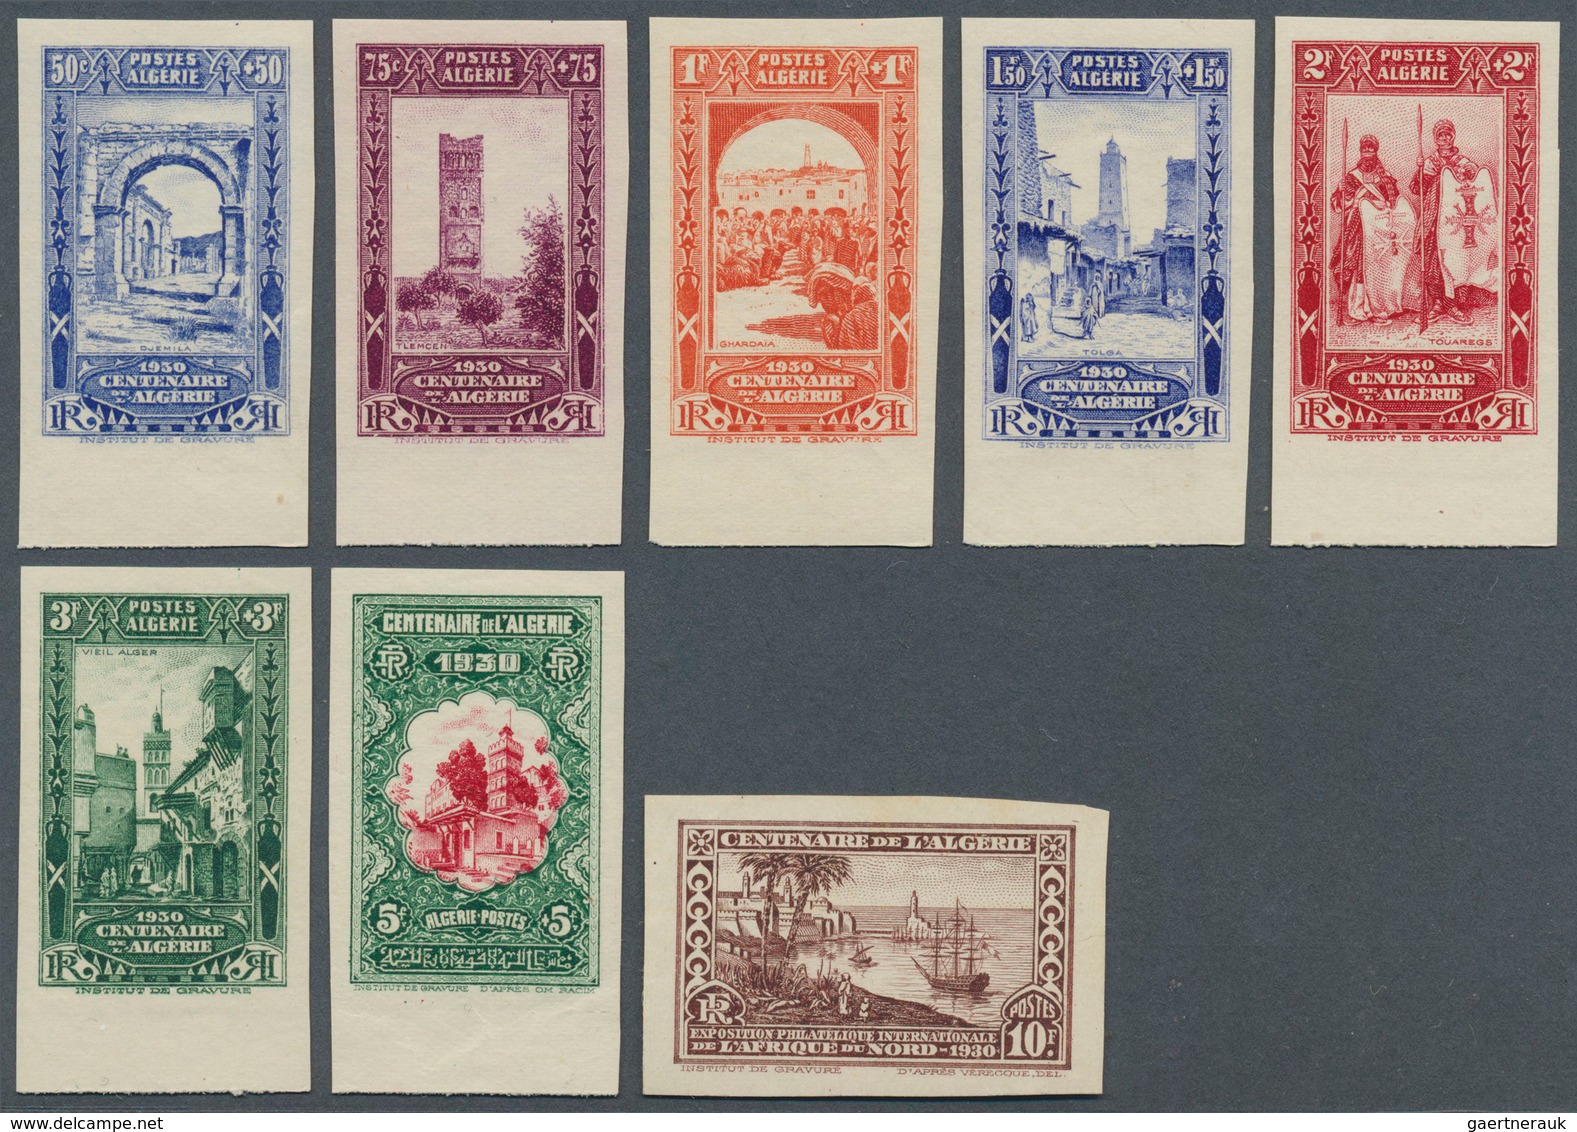 11547 Algerien: 1930, 100 Years Algerian Membership To France Com. Set Of 13 Stamps Mint Some Never Hinged - Algerien (1962-...)